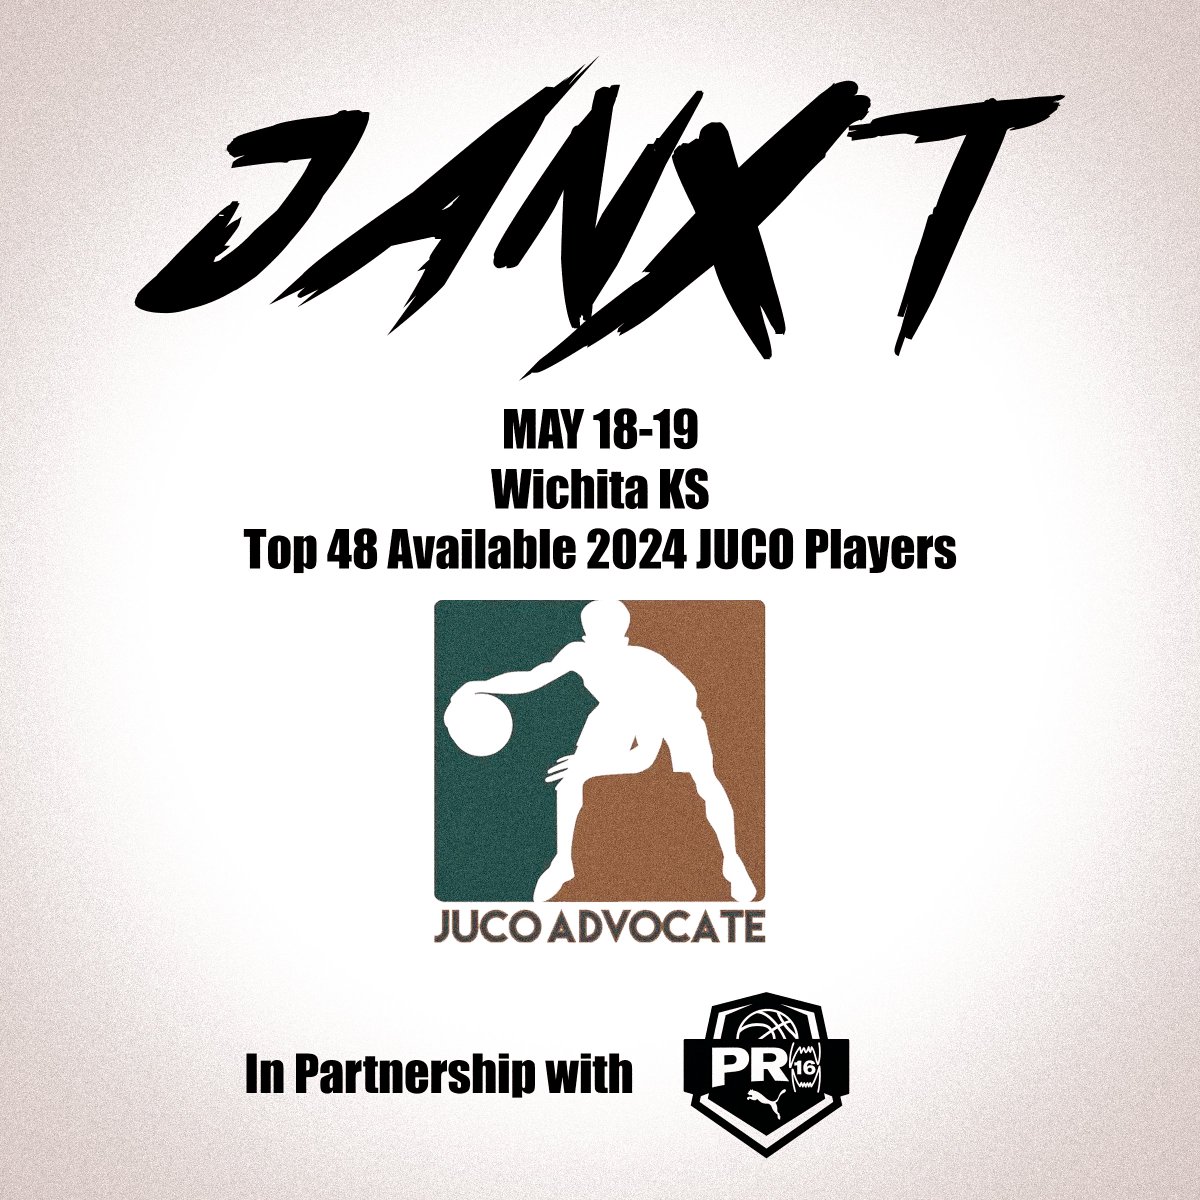 The next JANXT invite goes to 6'1 Bryson Smith of Dallas North Lake. In partnership with @NxtProHoops @PRO16League and @PUMAHoops May 18-19 Wichita KS Stay tuned for more invitations and exciting updates!!!